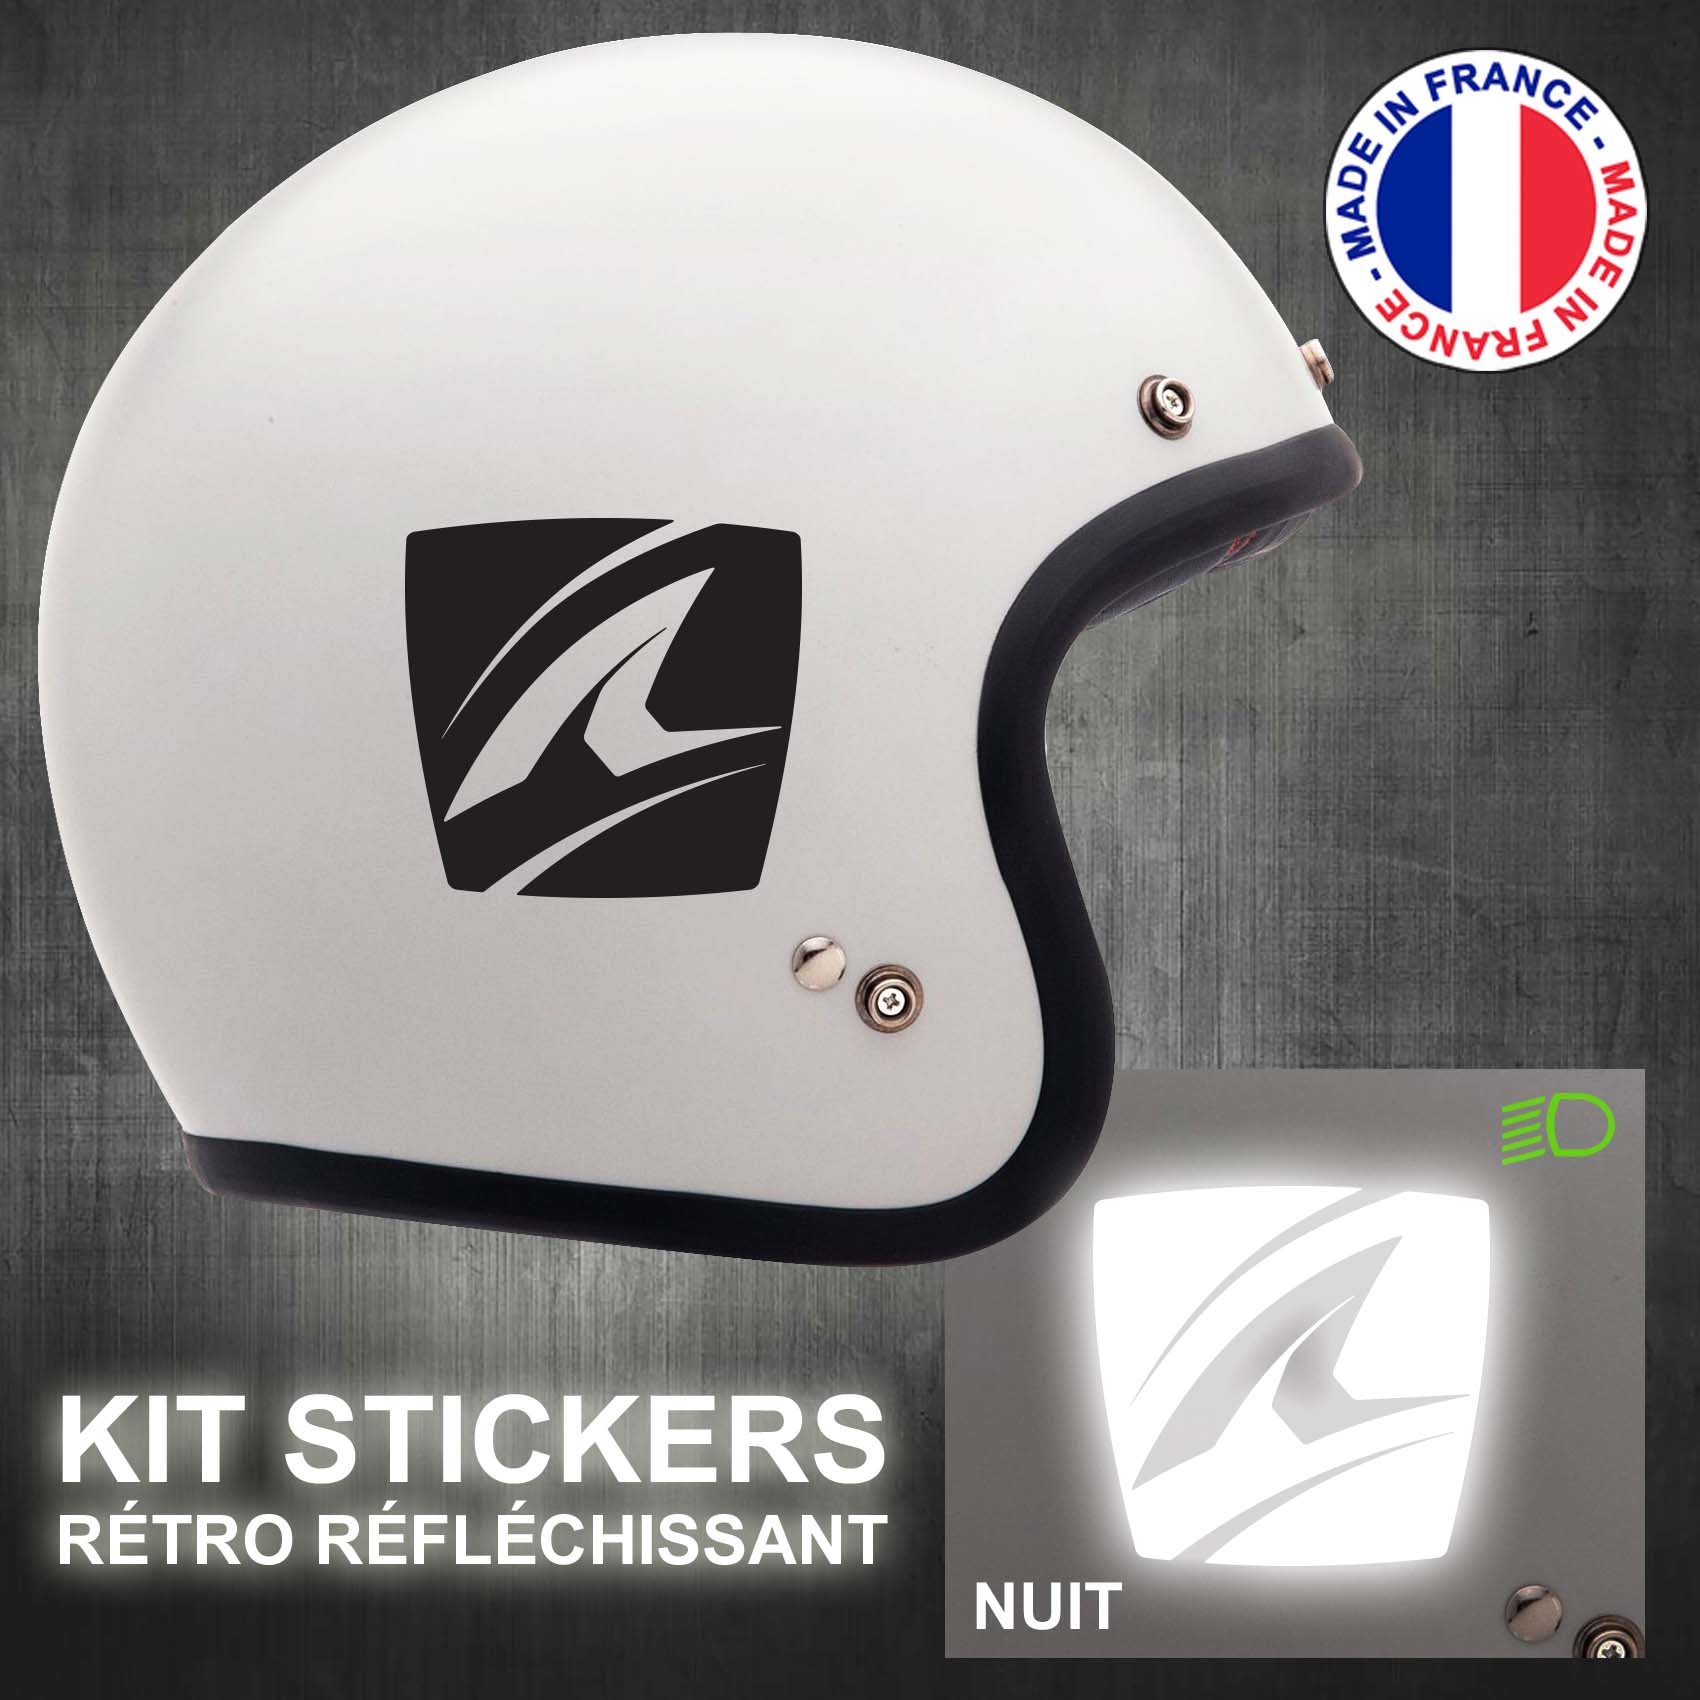 stickers-casque-moto-shark-ref2-retro-reflechissant-autocollant-blanc-moto-velo-tuning-racing-route-sticker-casques-adhesif-scooter-nuit-securite-decals-personnalise-personnalisable-min